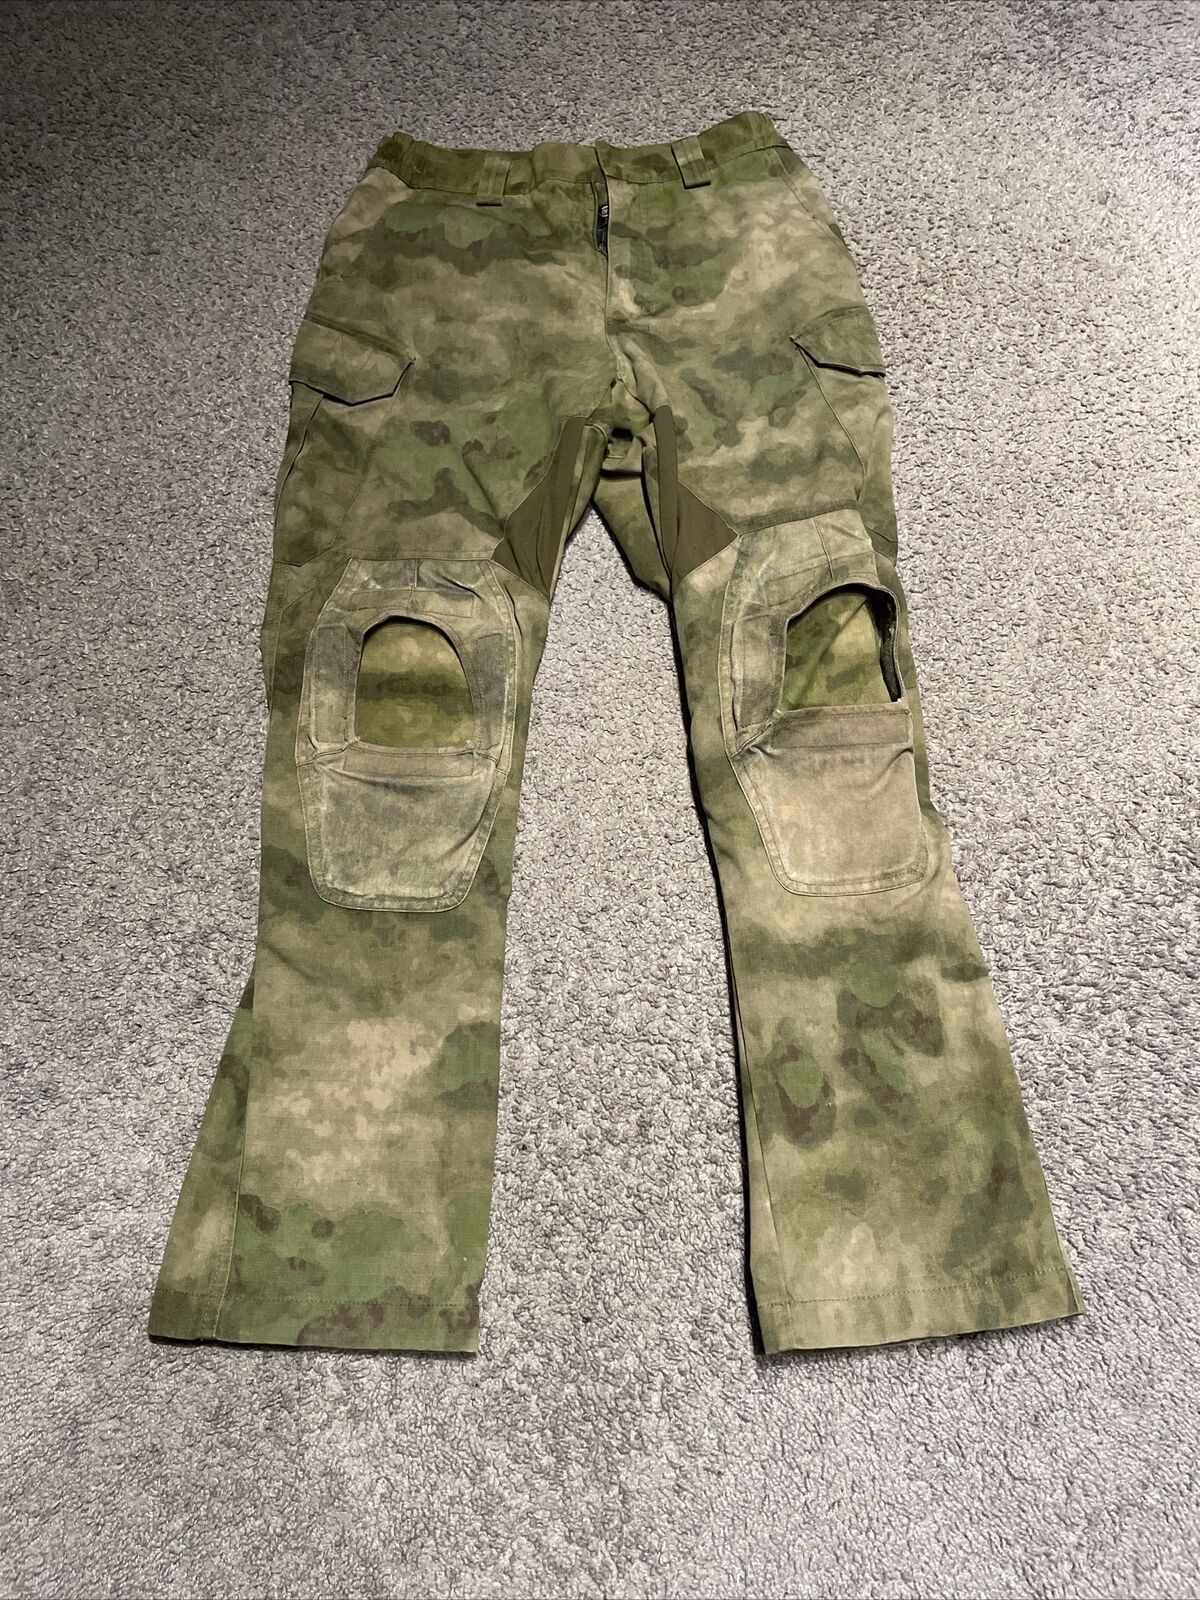 Crye Precision Influenced Atacs FG OPS UR Tactical Advanced Response Pants 30S